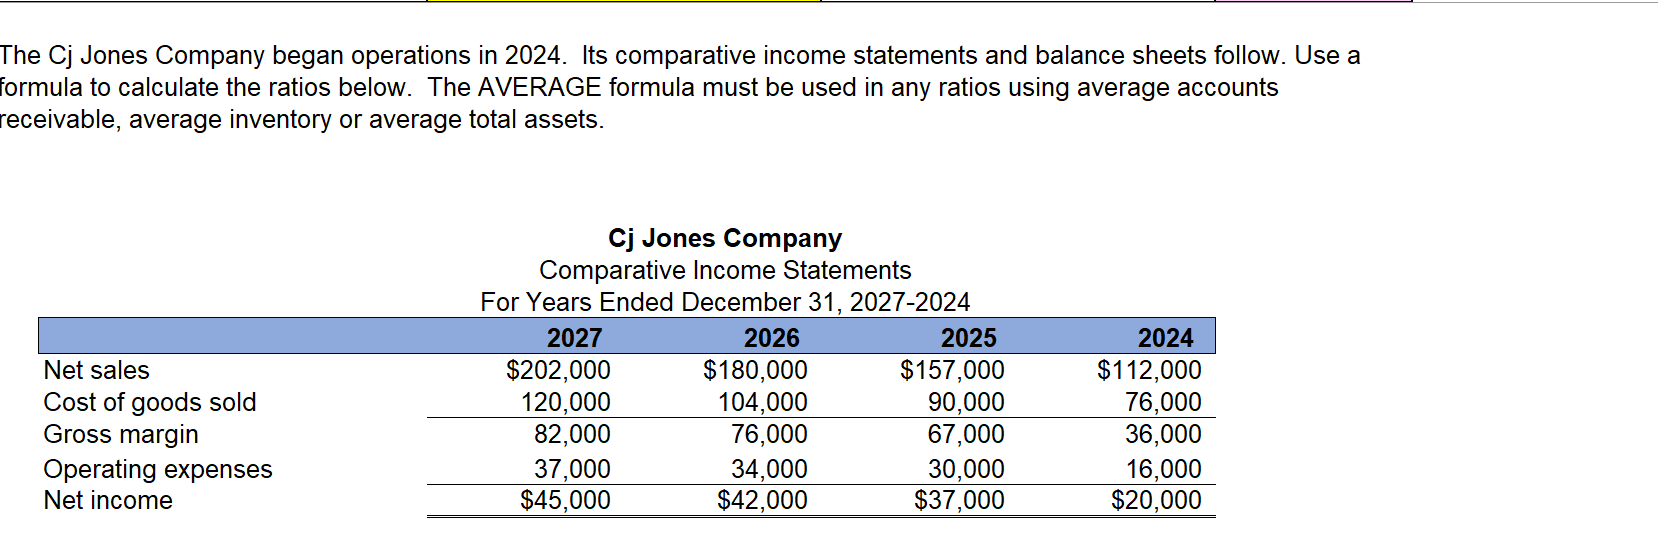 The Cj Jones Company began operations in 2024. Its comparative income statements and balance sheets follow.